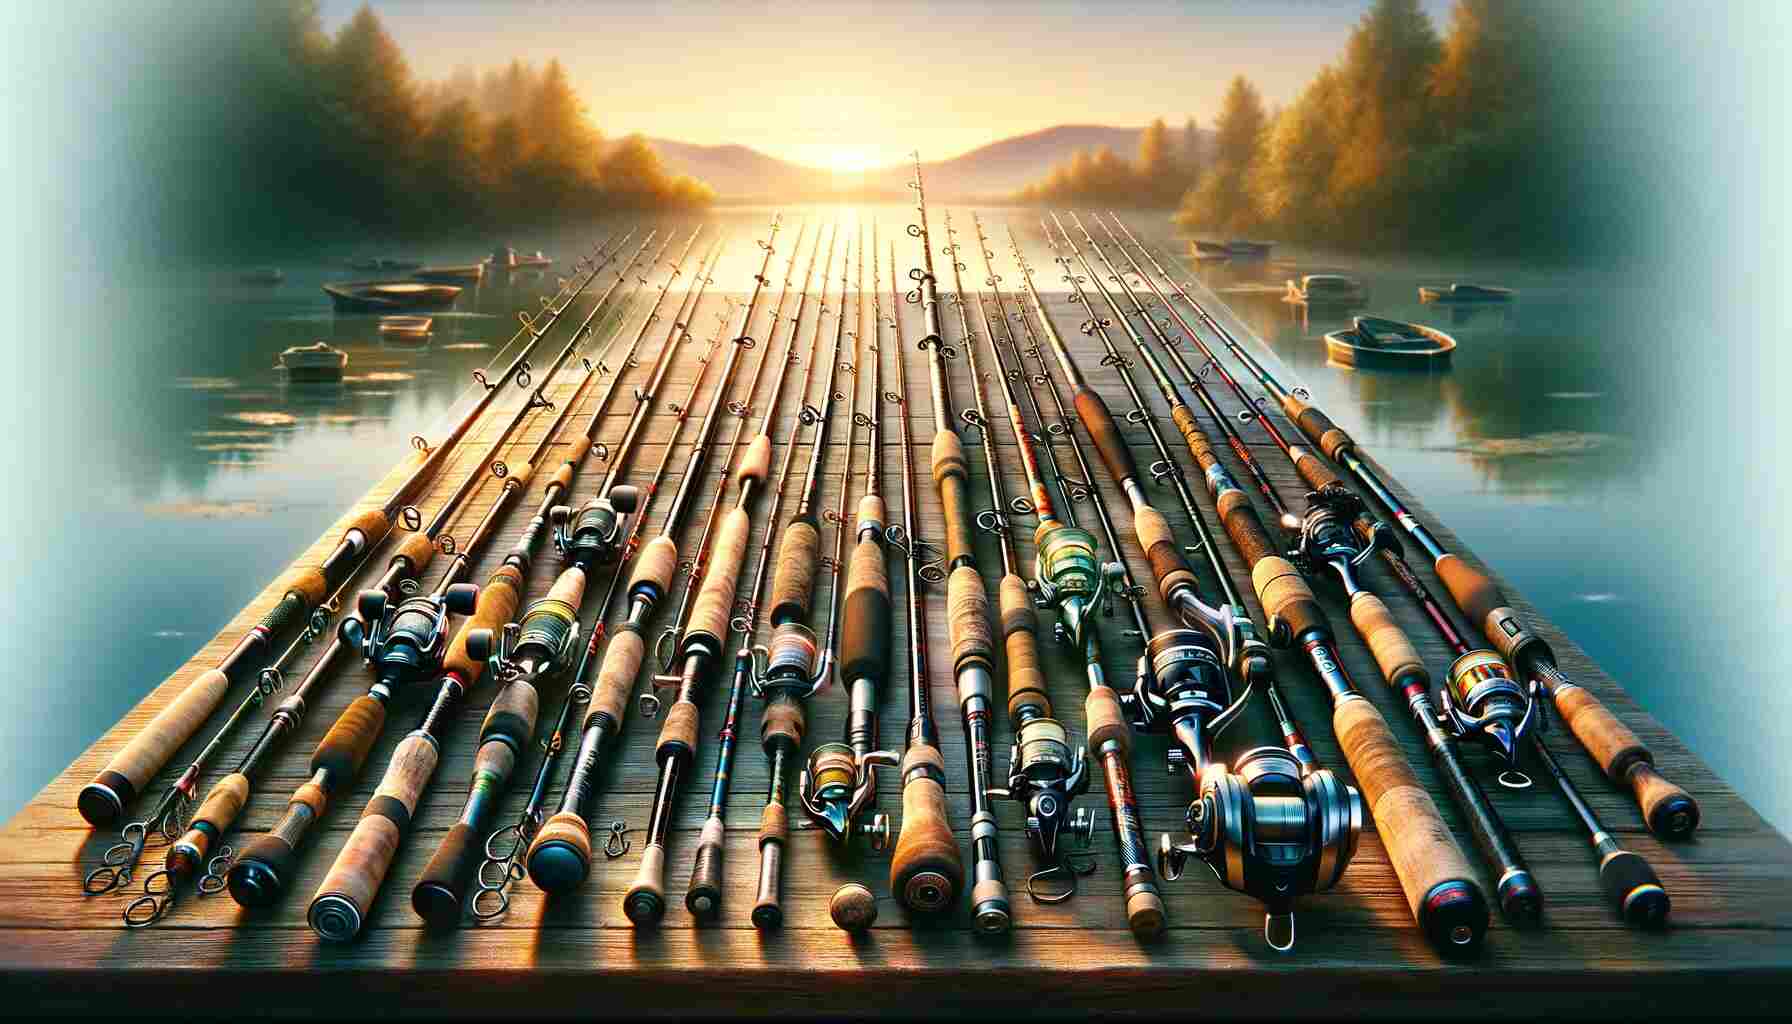 Assortment of 7-foot medium-light spinning and casting fishing rods, displayed in front of a serene outdoor scene with a calm lake, distant mountains, and a soft morning sky, highlighting the detailed craftsmanship of the reels and handles